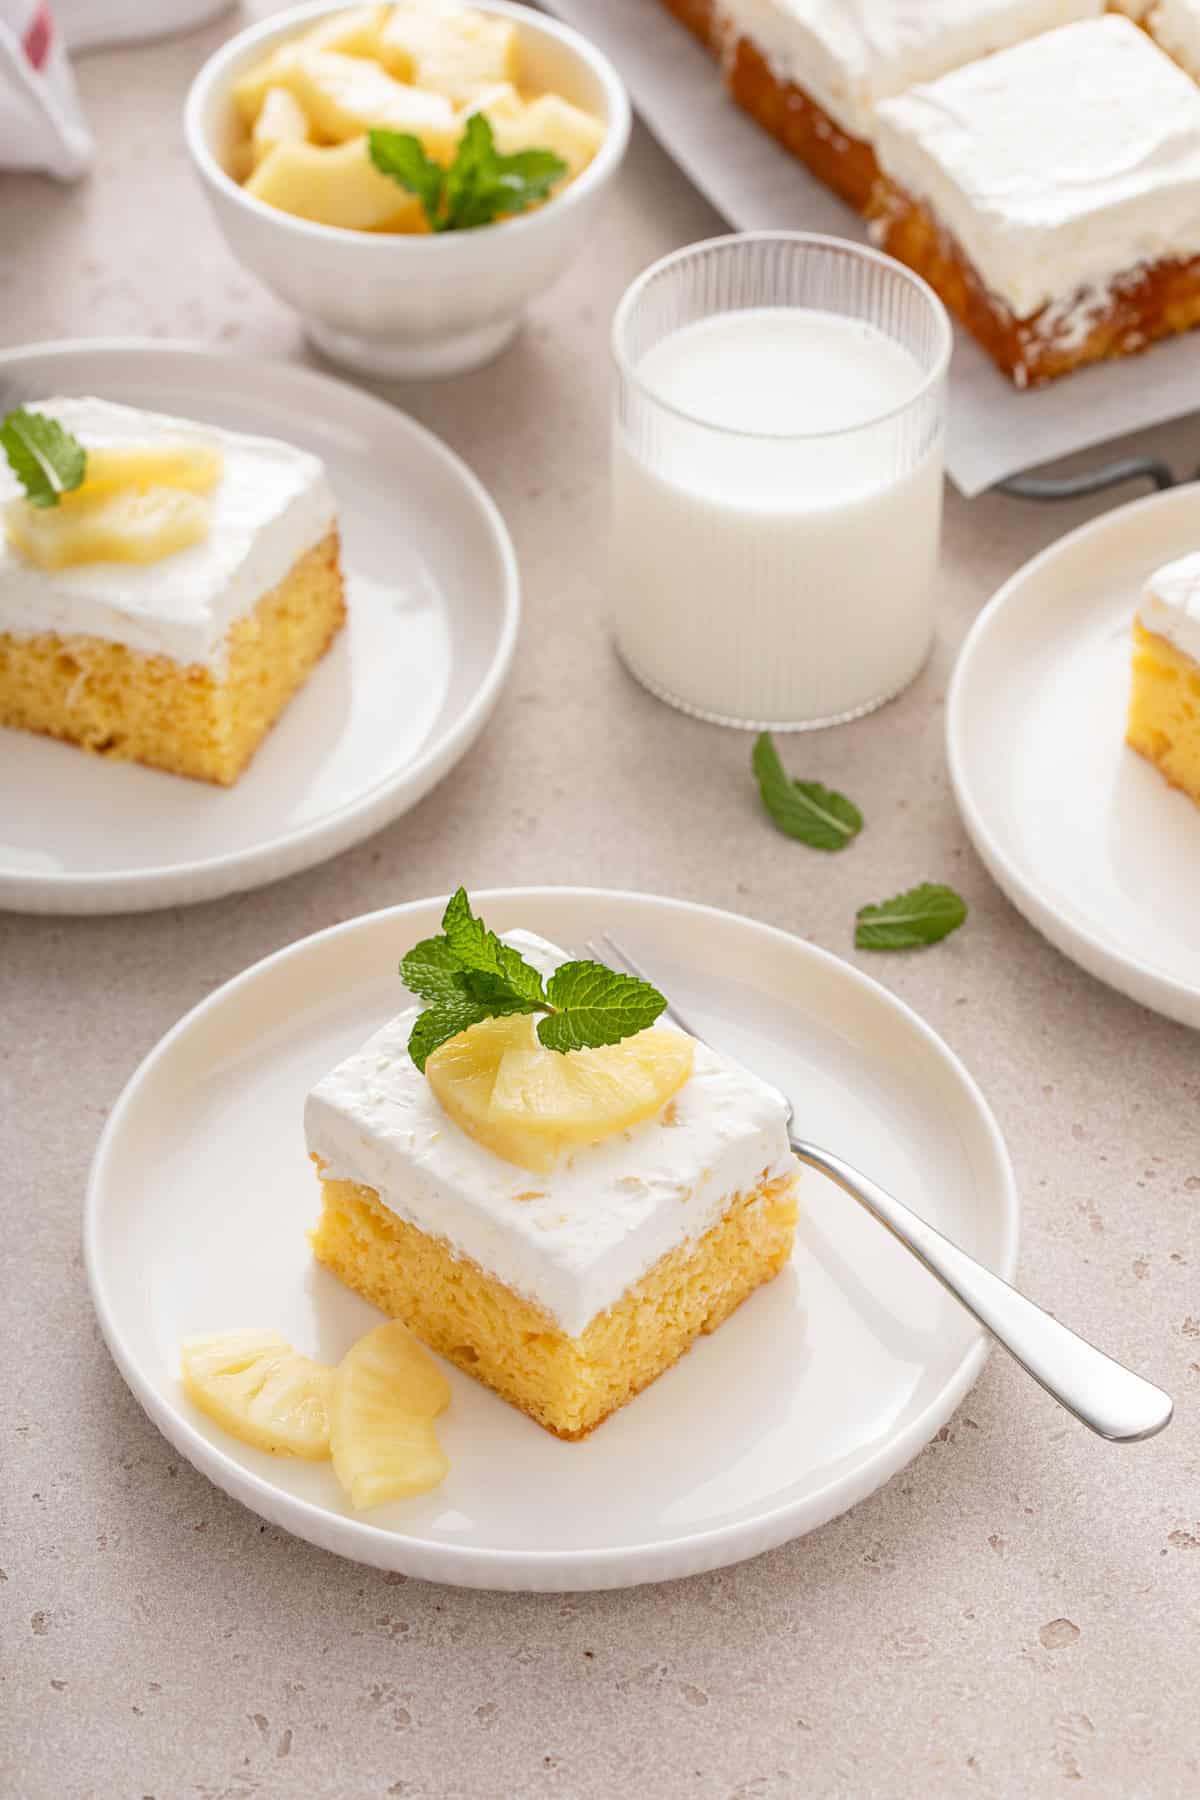 Several plated slices of easy pineapple cake around a glass of milk.